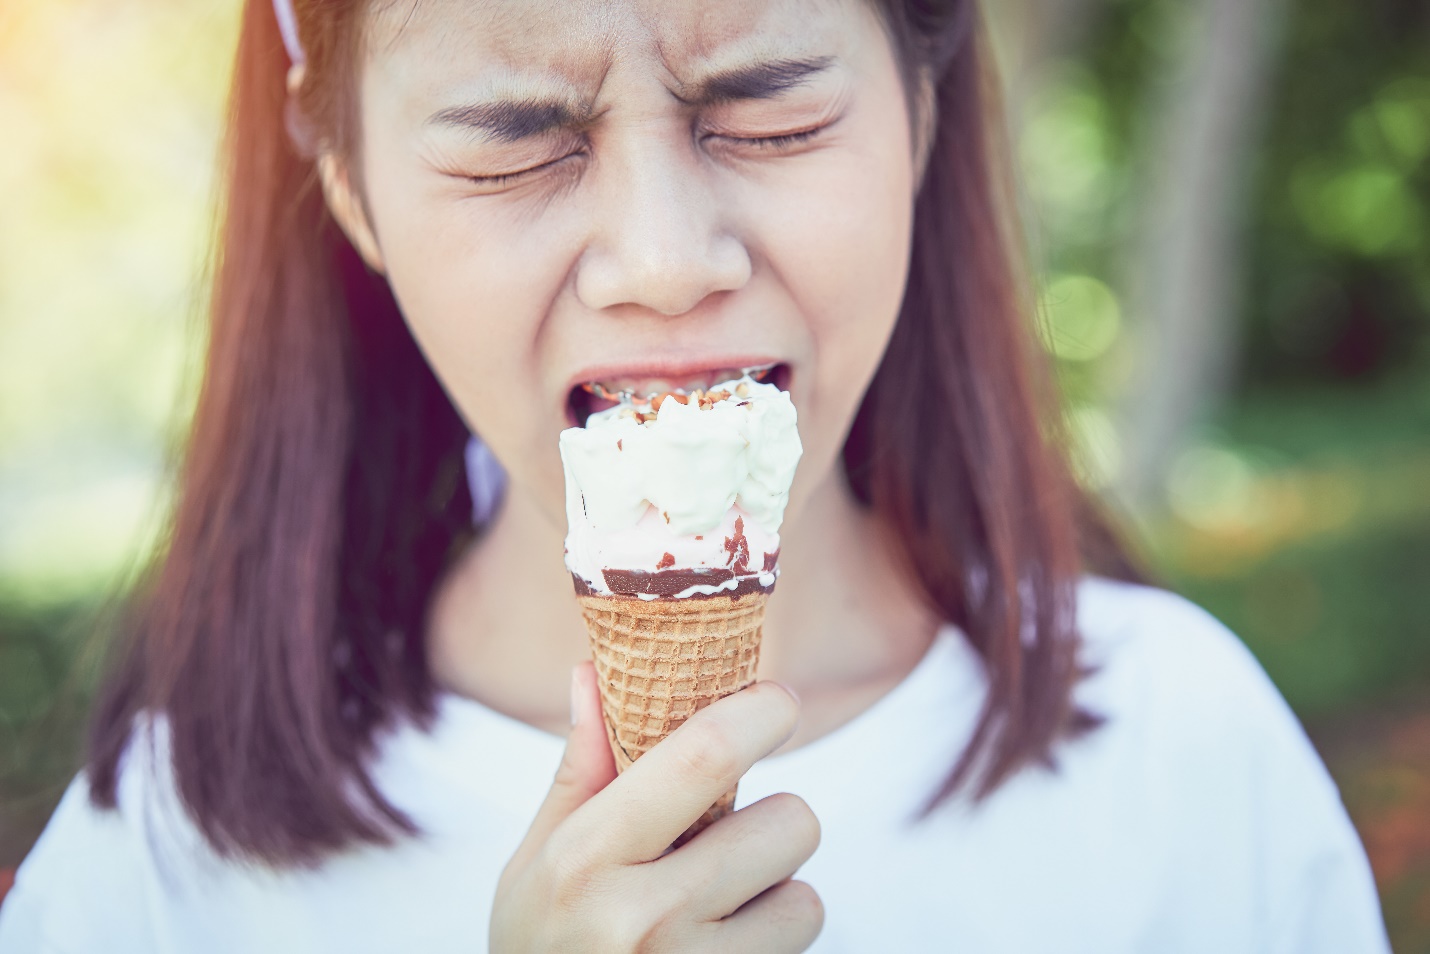 Women eat ice cream and have a toothache because cold